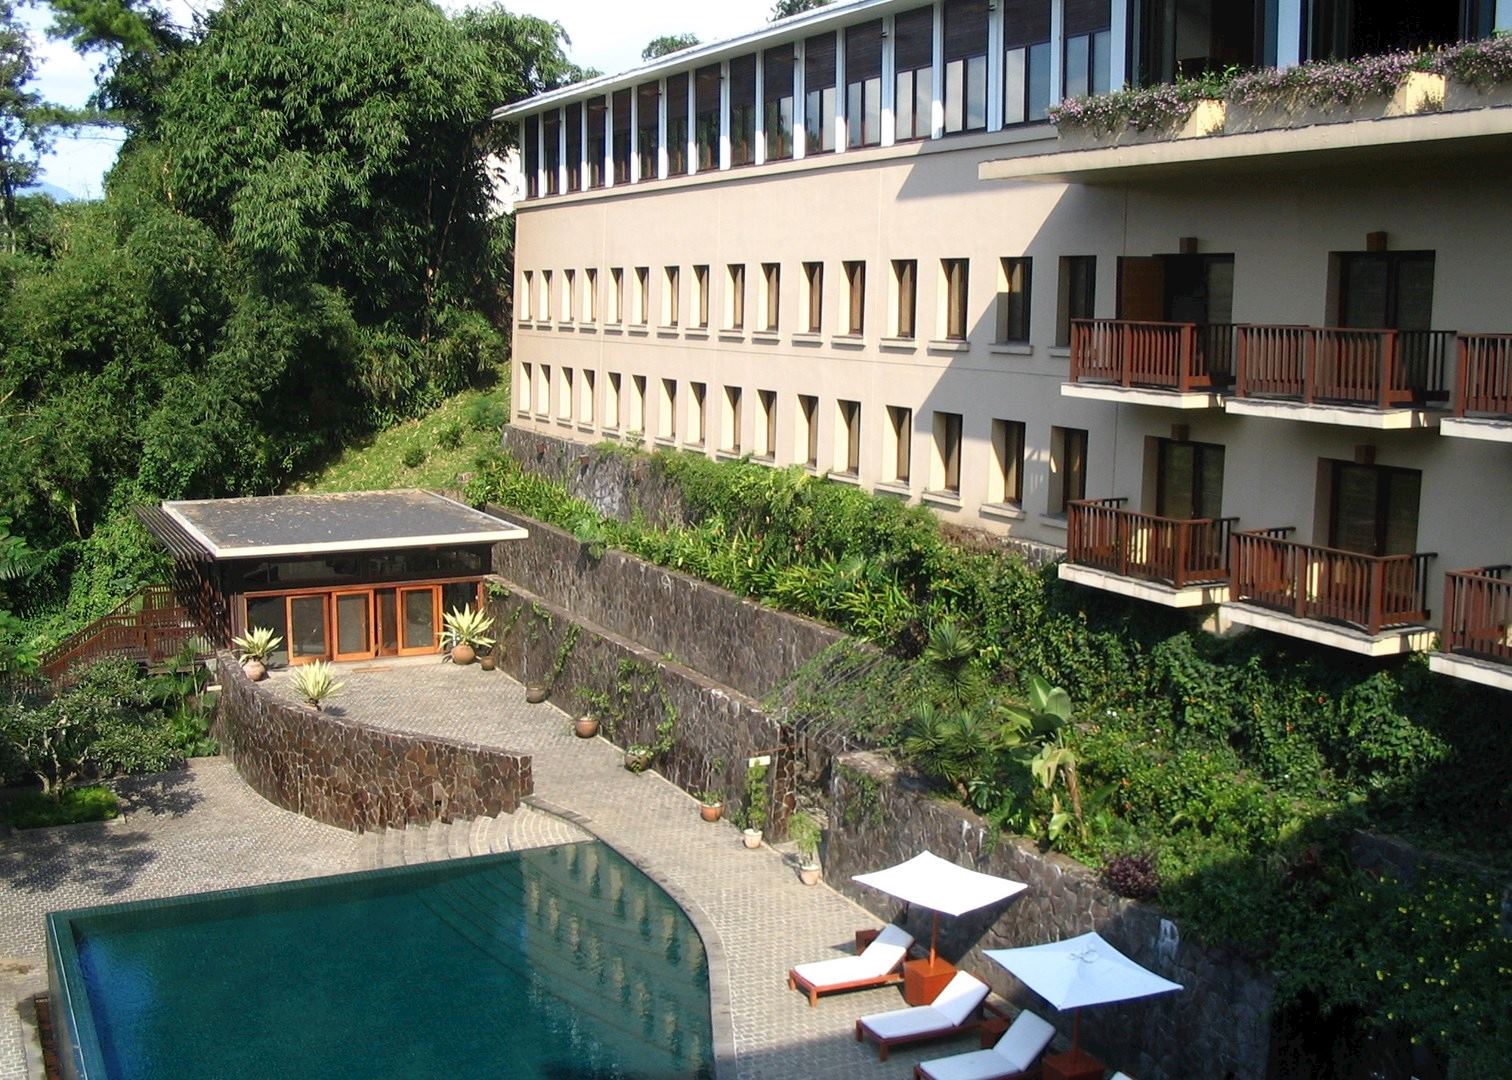  Padma  Hotel  Hotels  in Bandung  Audley Travel